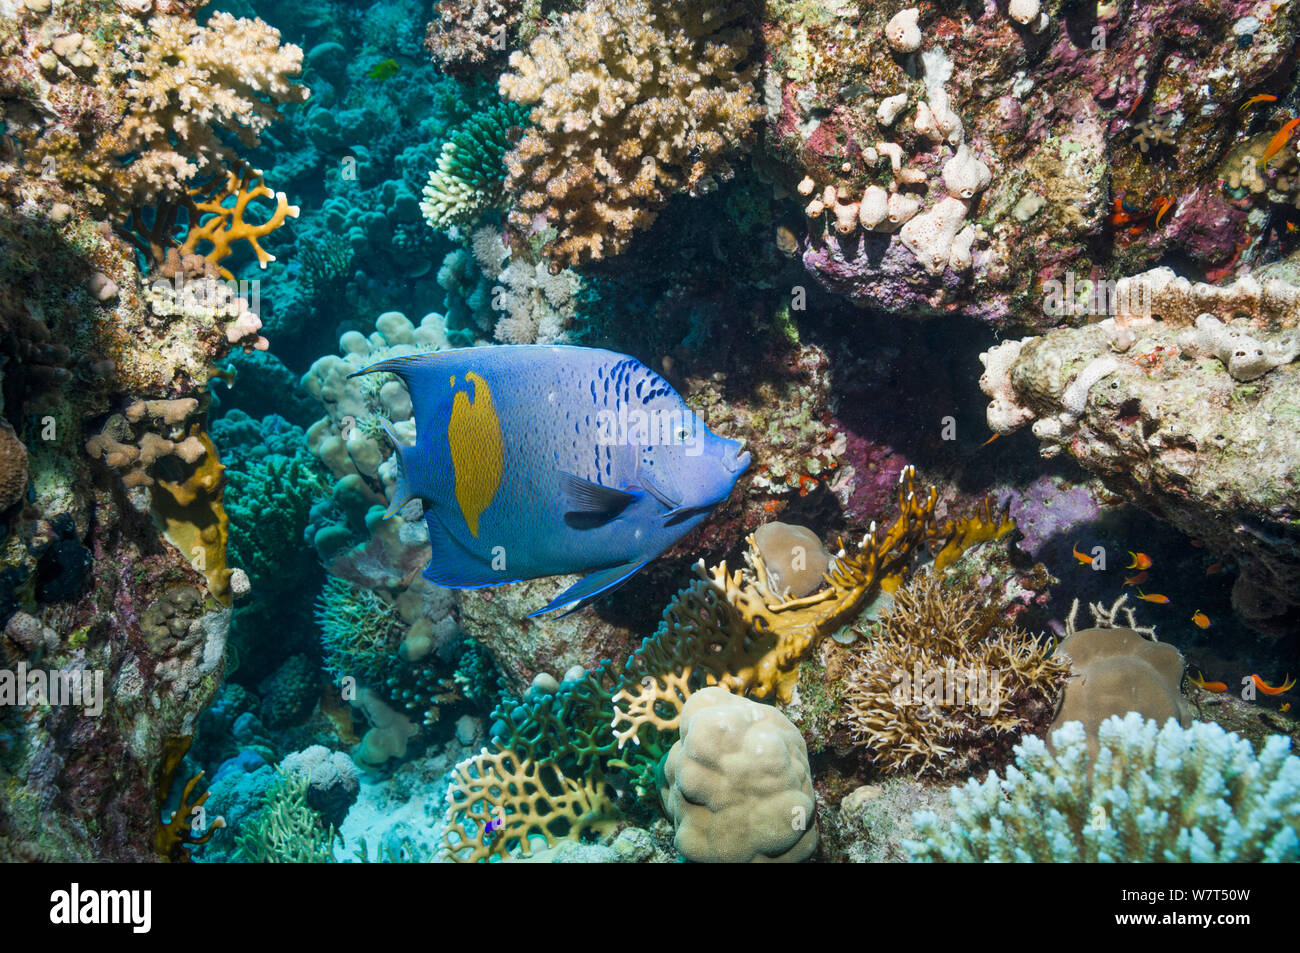 Yellowbar angelfish (Pomacanthus maculosus) swimming over coral reef. Egypt, Red Sea. Stock Photo